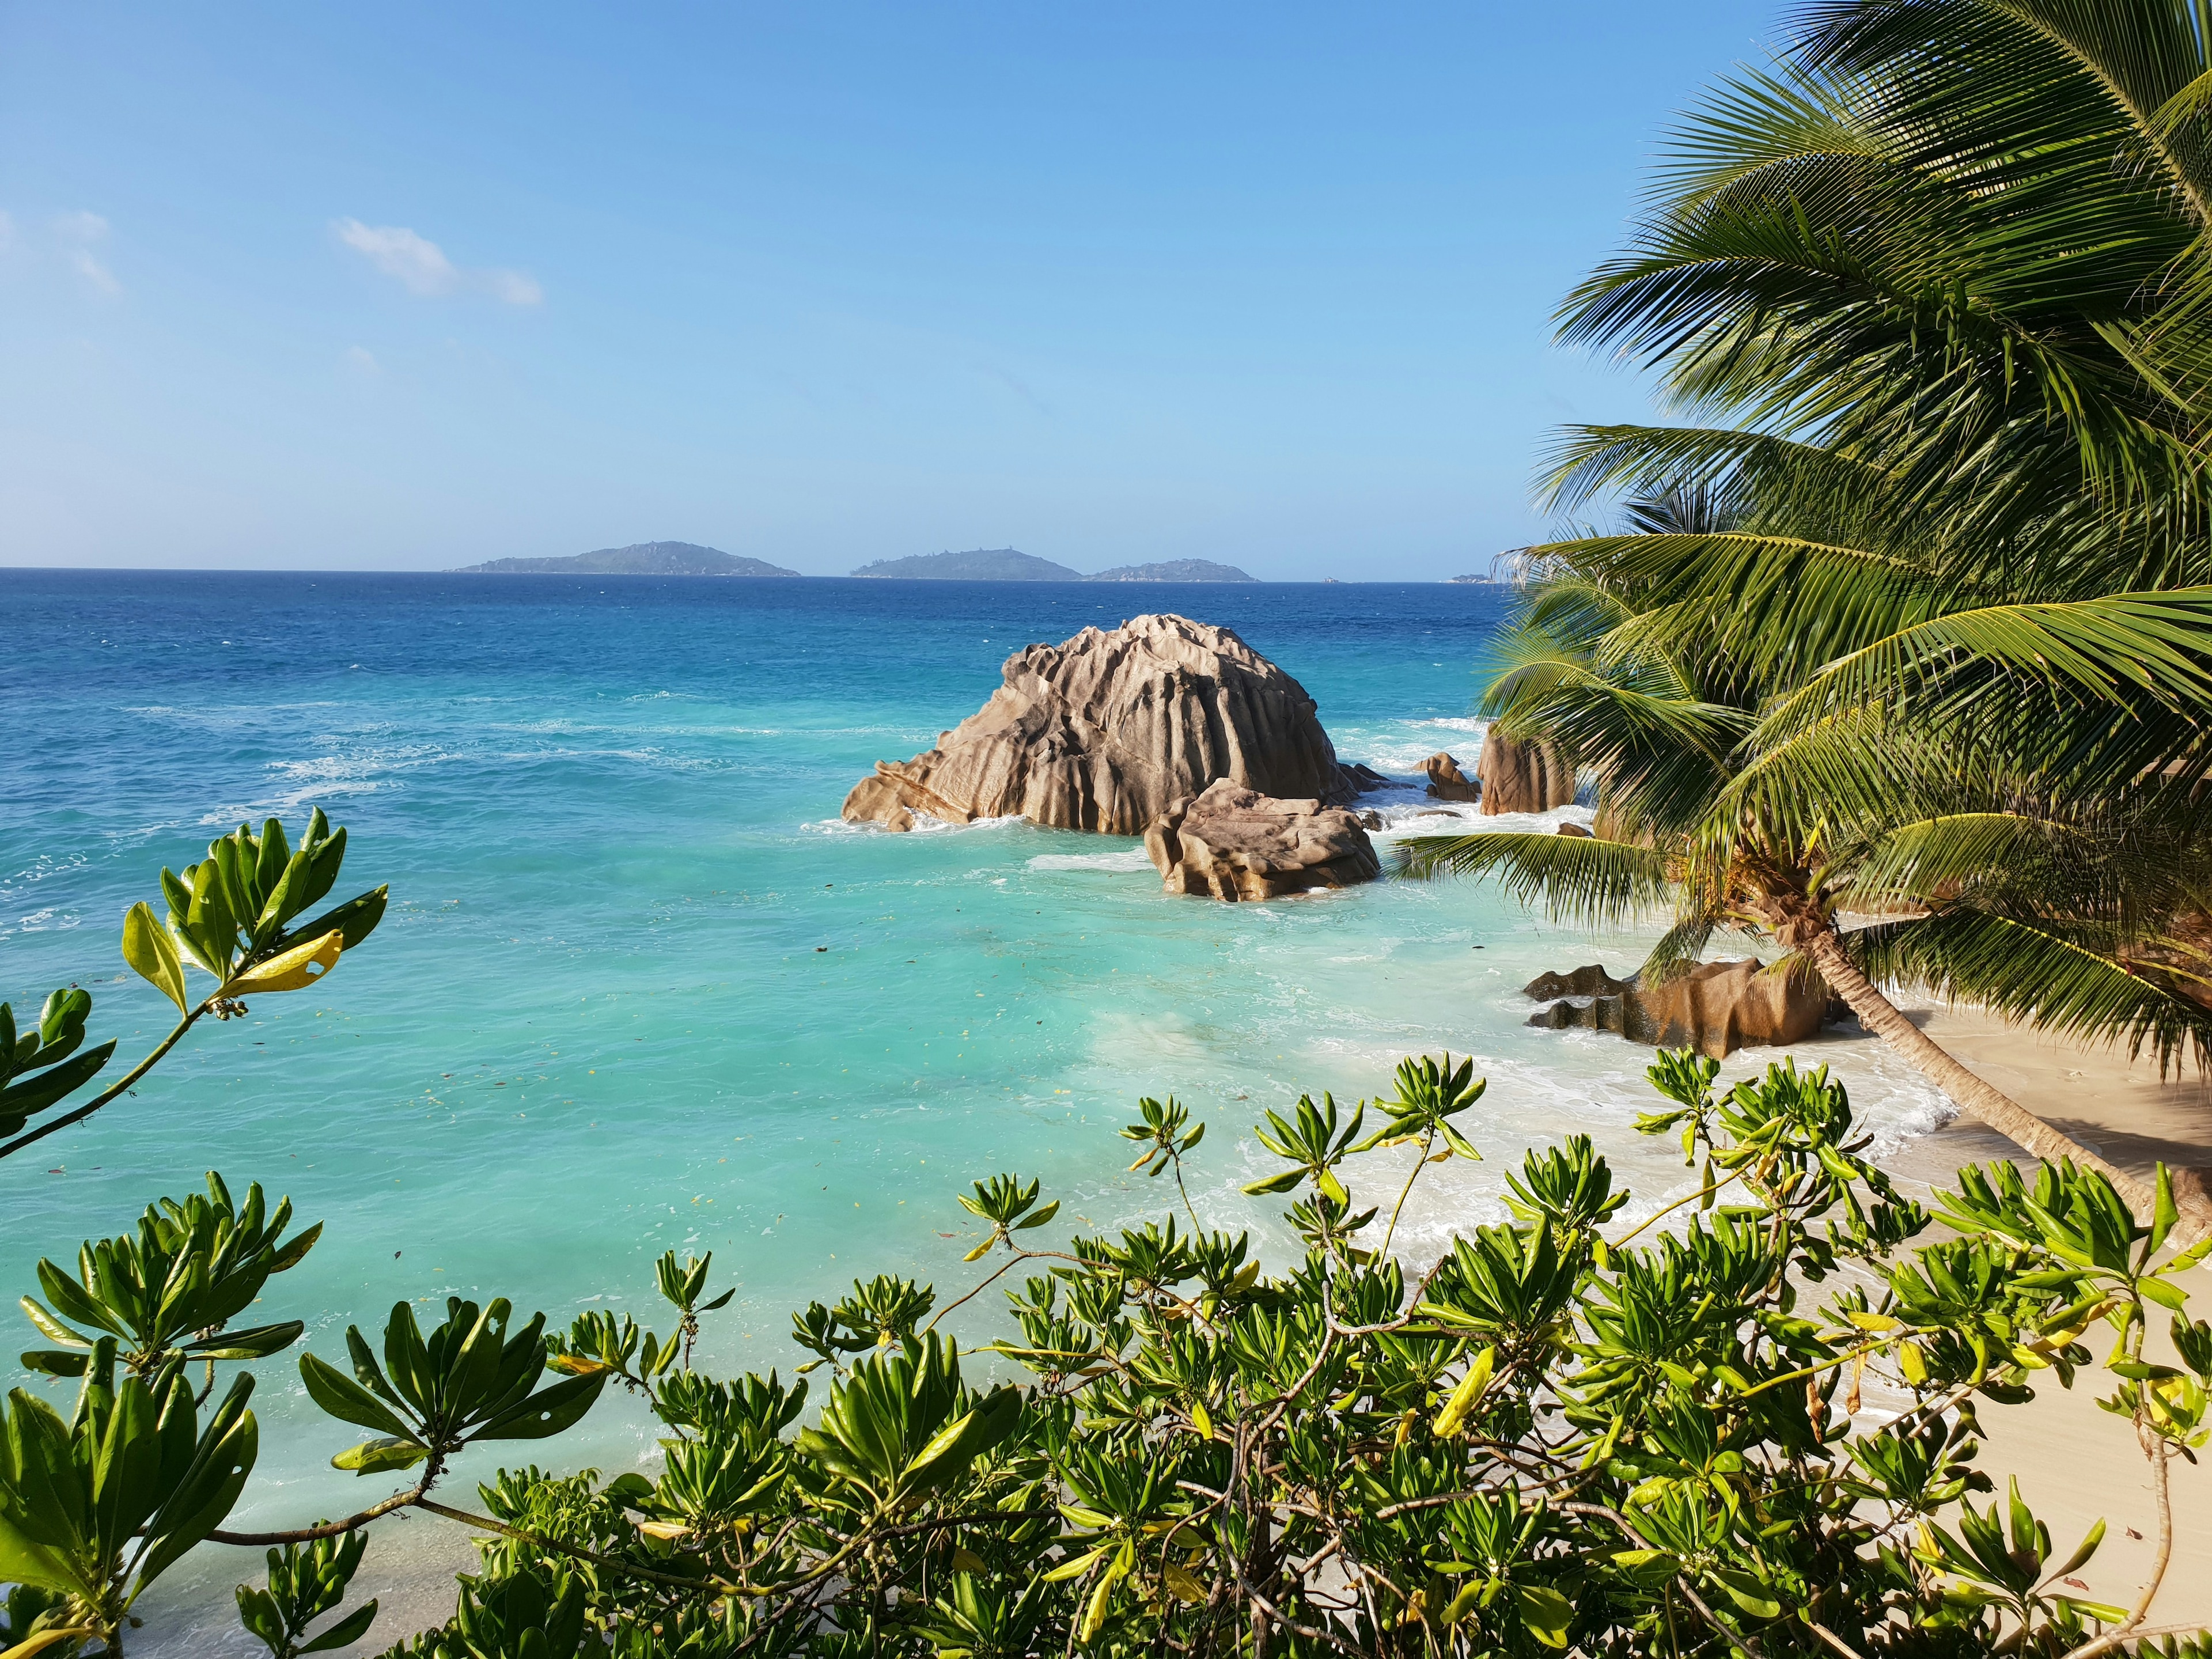 Things To Do in Seychelles - From Relaxing on Beaches to Hiking Trails